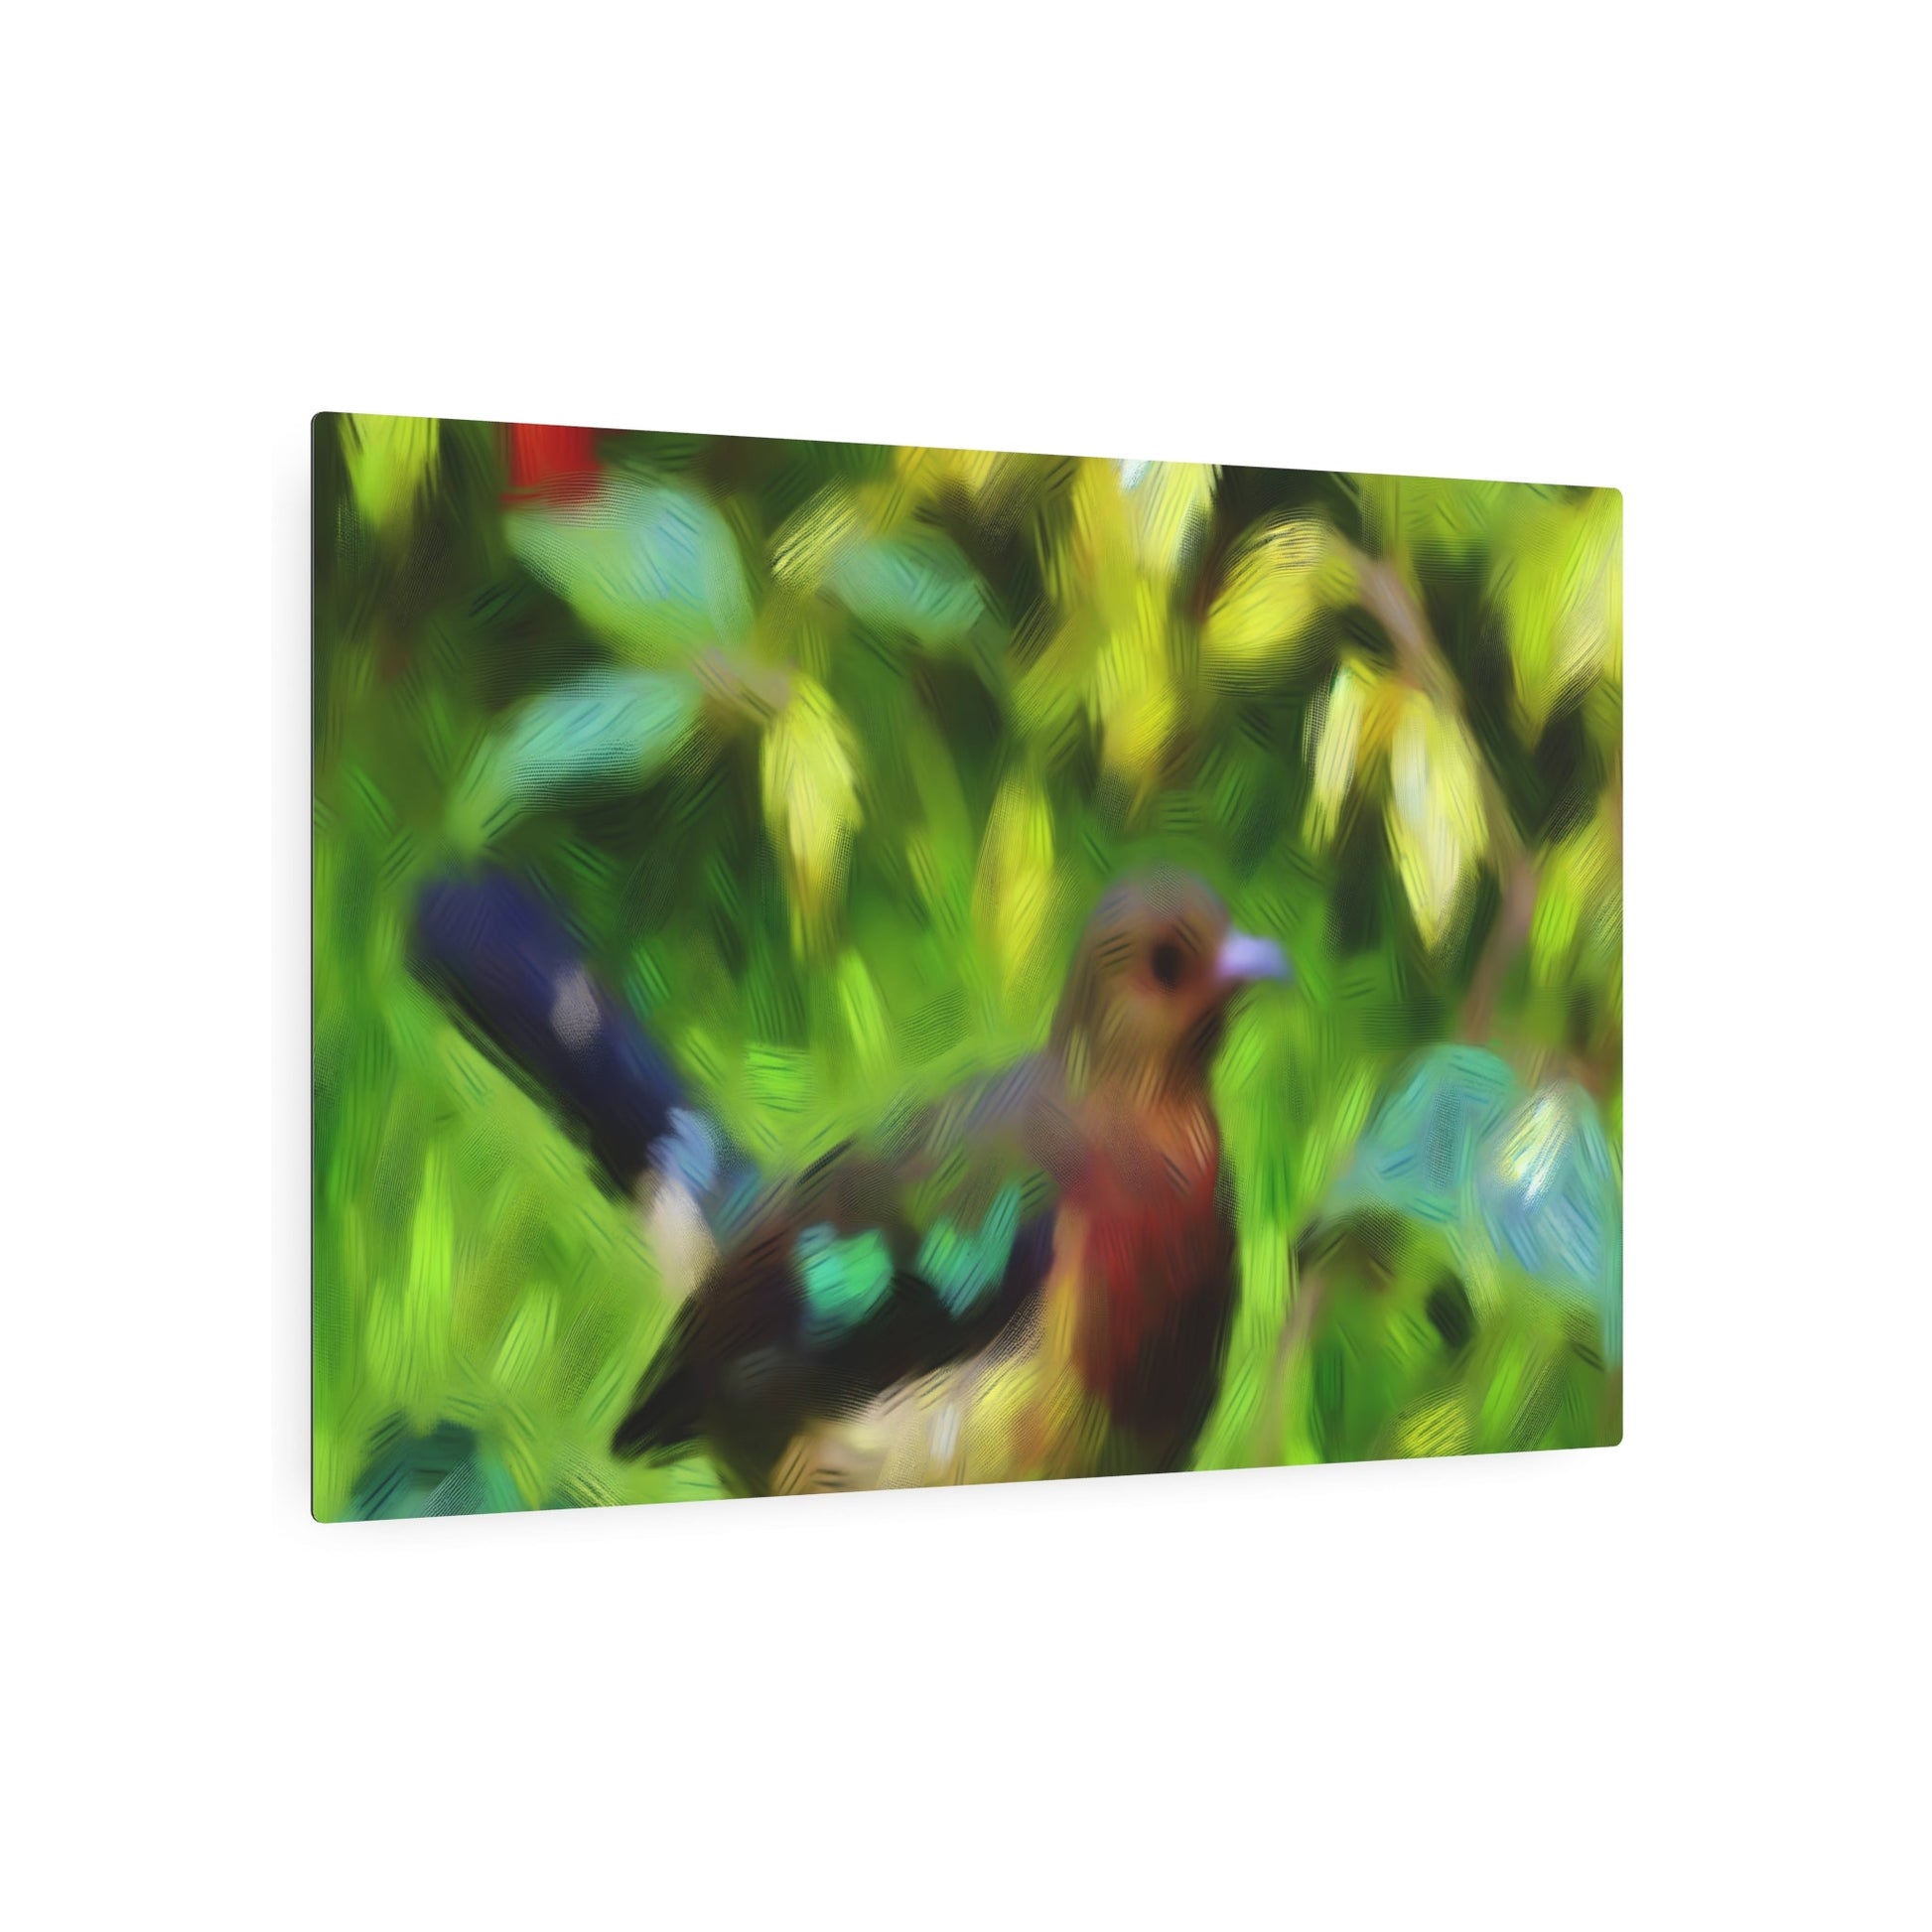 Metal Poster Art | "Impressionist Western Art Style - Nature-Inspired Bird Painting in Impressionism" - Metal Poster Art 36″ x 24″ (Horizontal) 0.12''